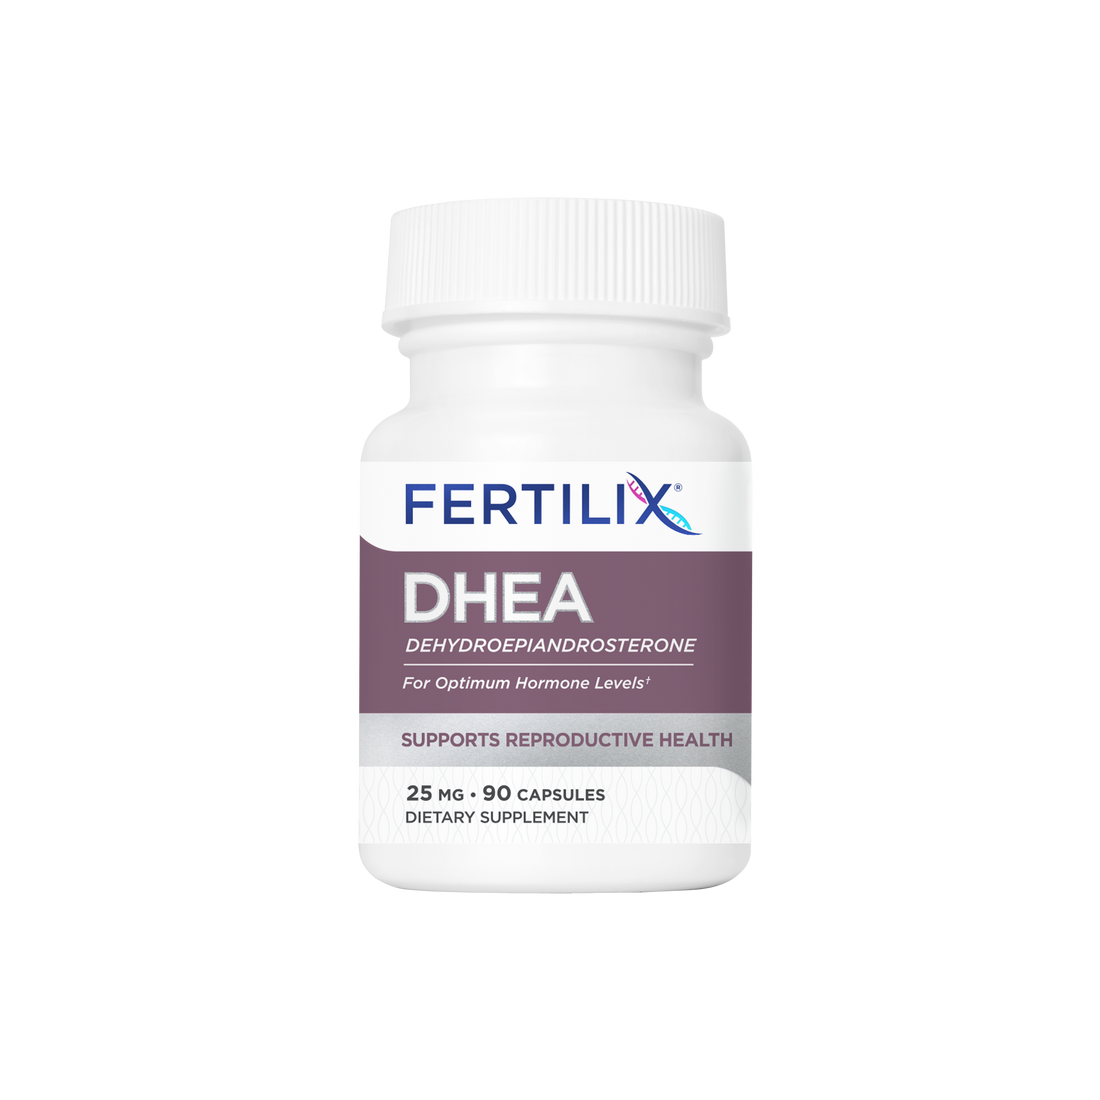 Bottle of DHEA in vegetarian capsules to help support optimum hormone levels for female reproductive health